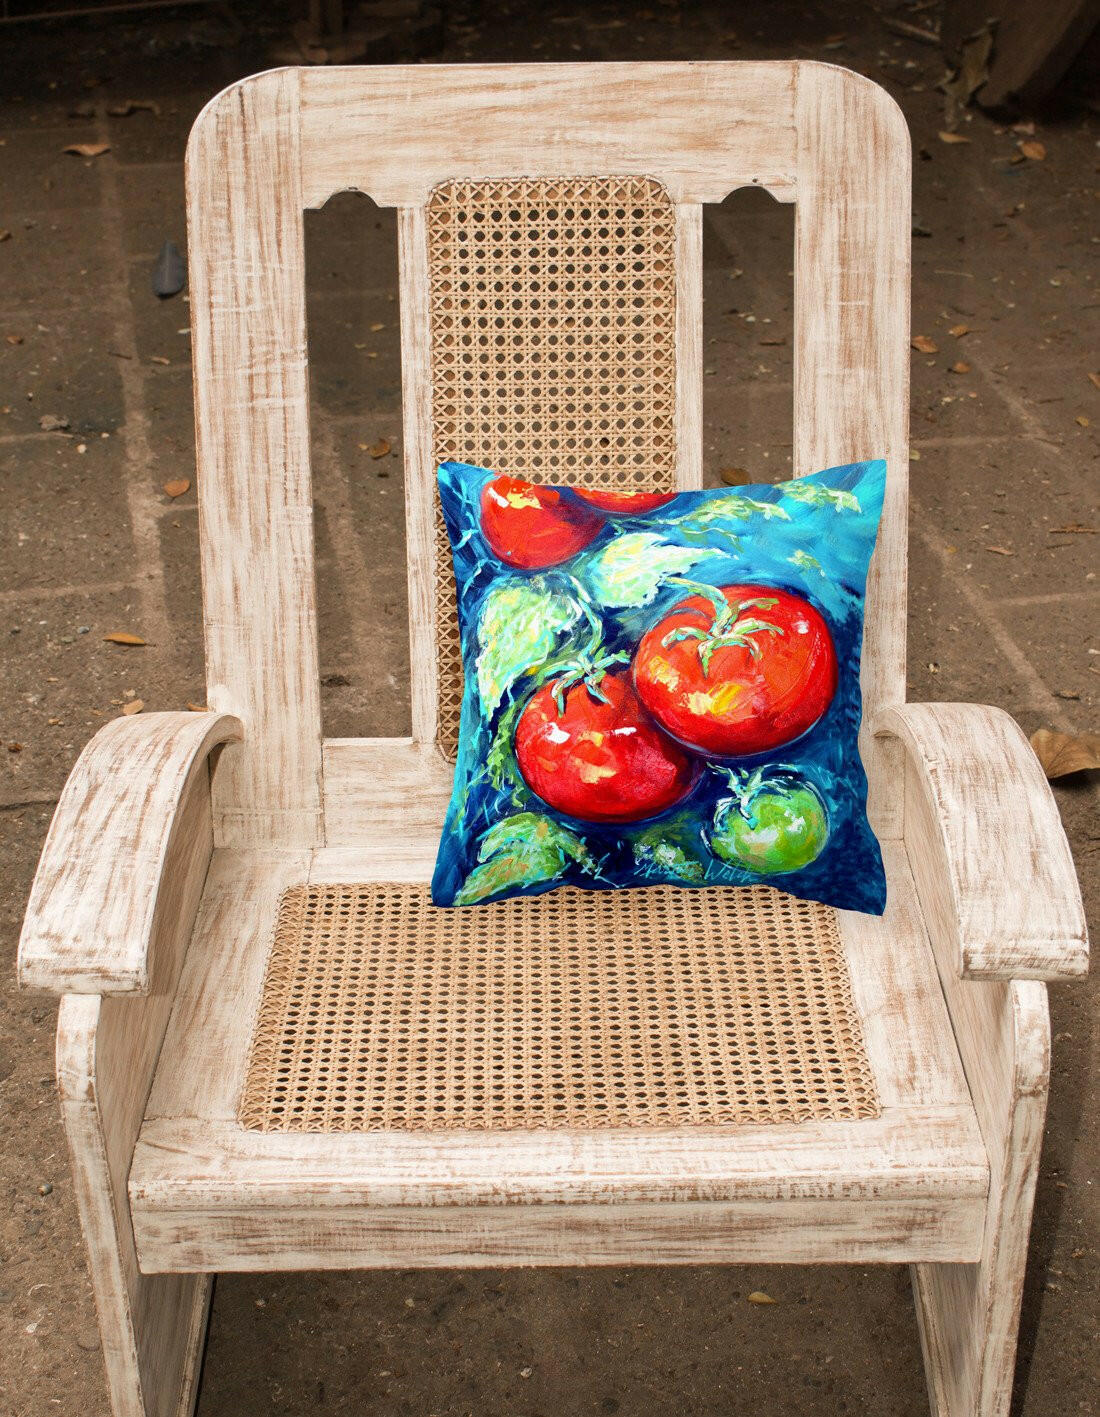 Vegetables - Tomatoes on the vine Canvas Fabric Decorative Pillow MW1148PW1414 by Caroline's Treasures